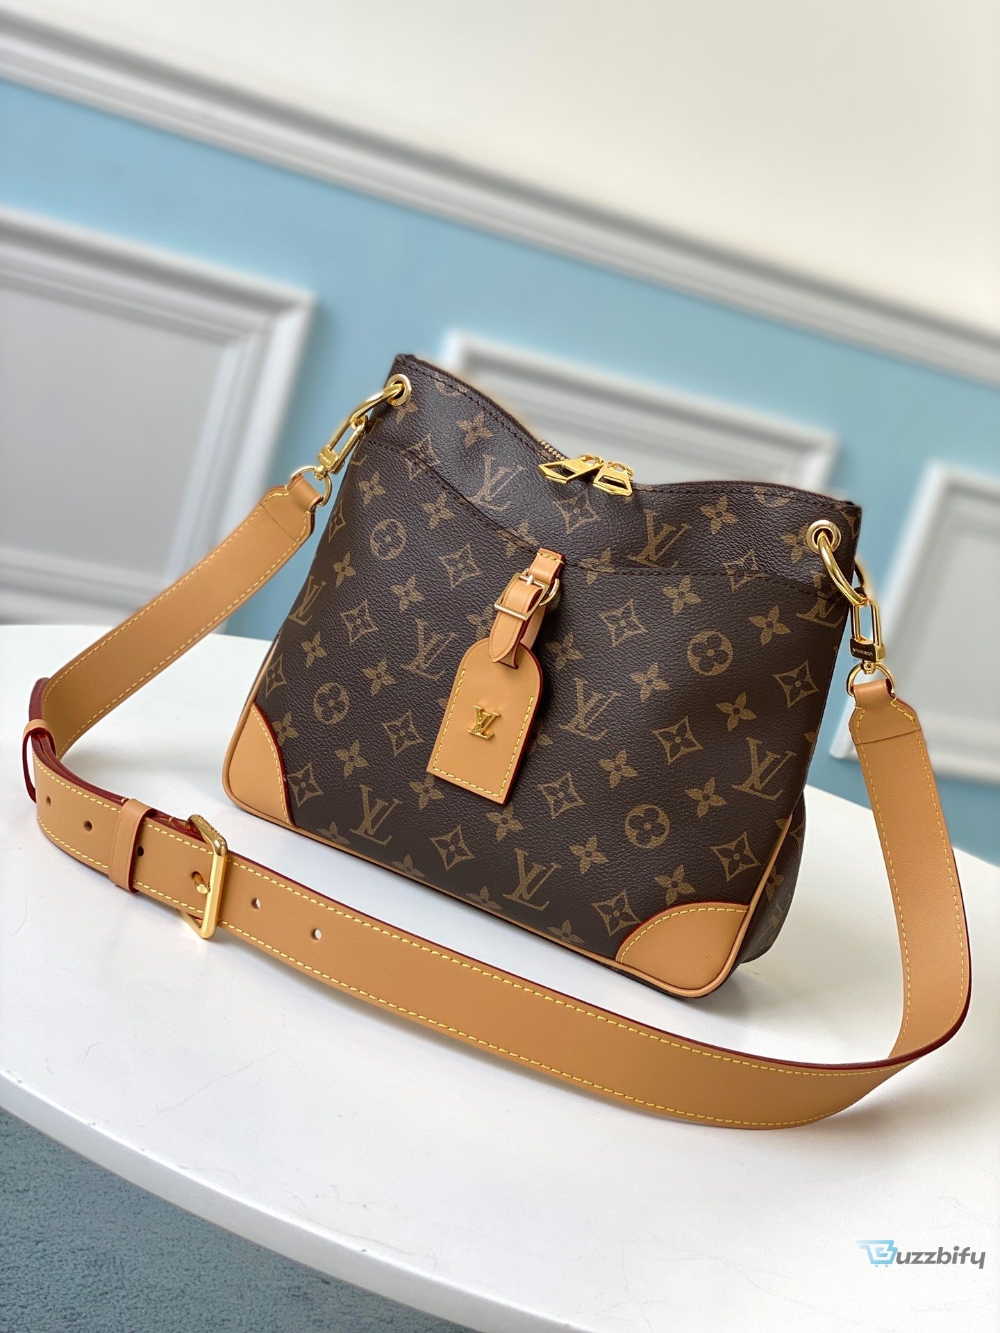 louis vuitton odeon pm monogram canvas natural for fallwinter womens handbags shoulder and crossbody bags 11in28cm lv m45354 2799 buzzbify 1 20